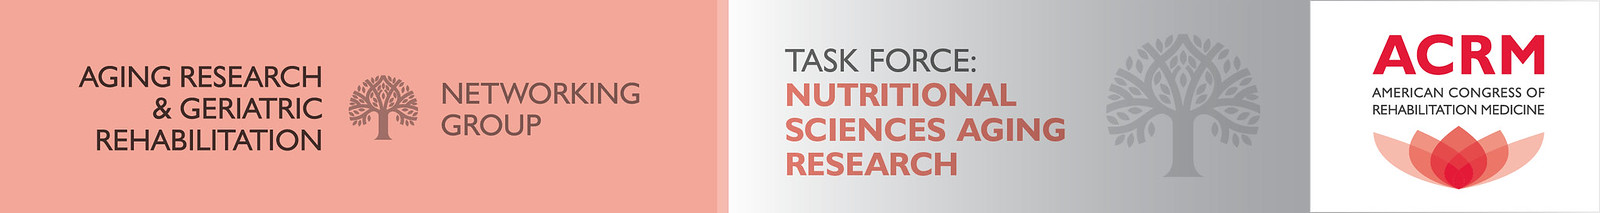 Aging Research Nutritional Sciences Task Force header